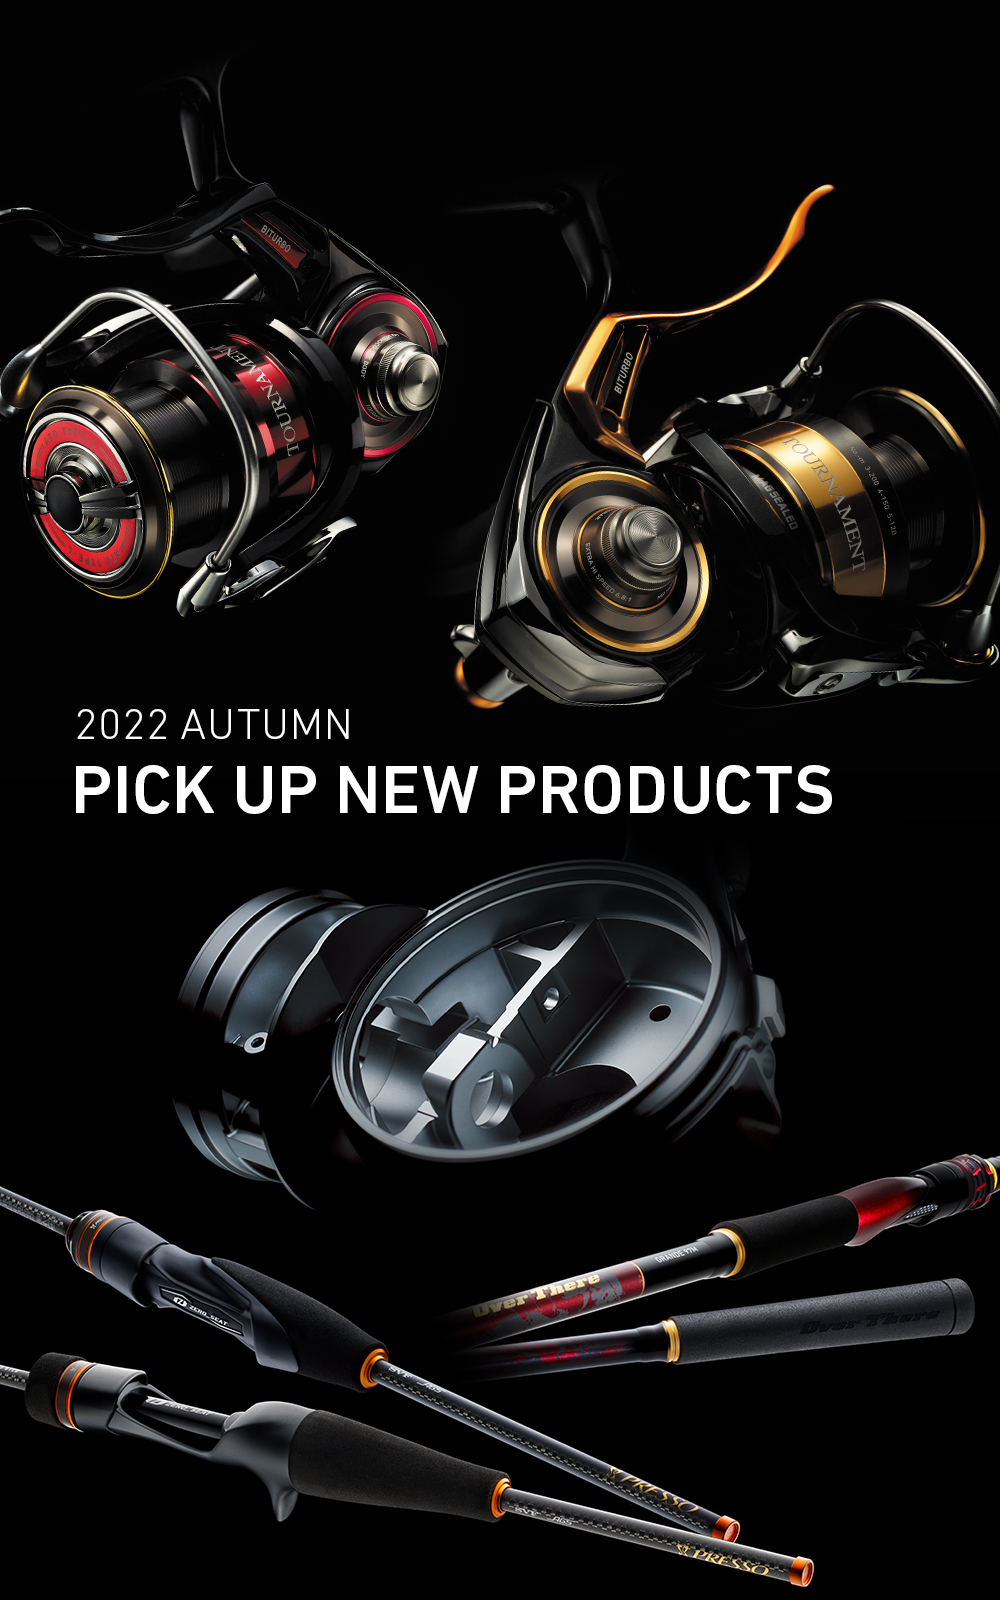 2022 AUTUMN PICK UP NEW PRODUCTS